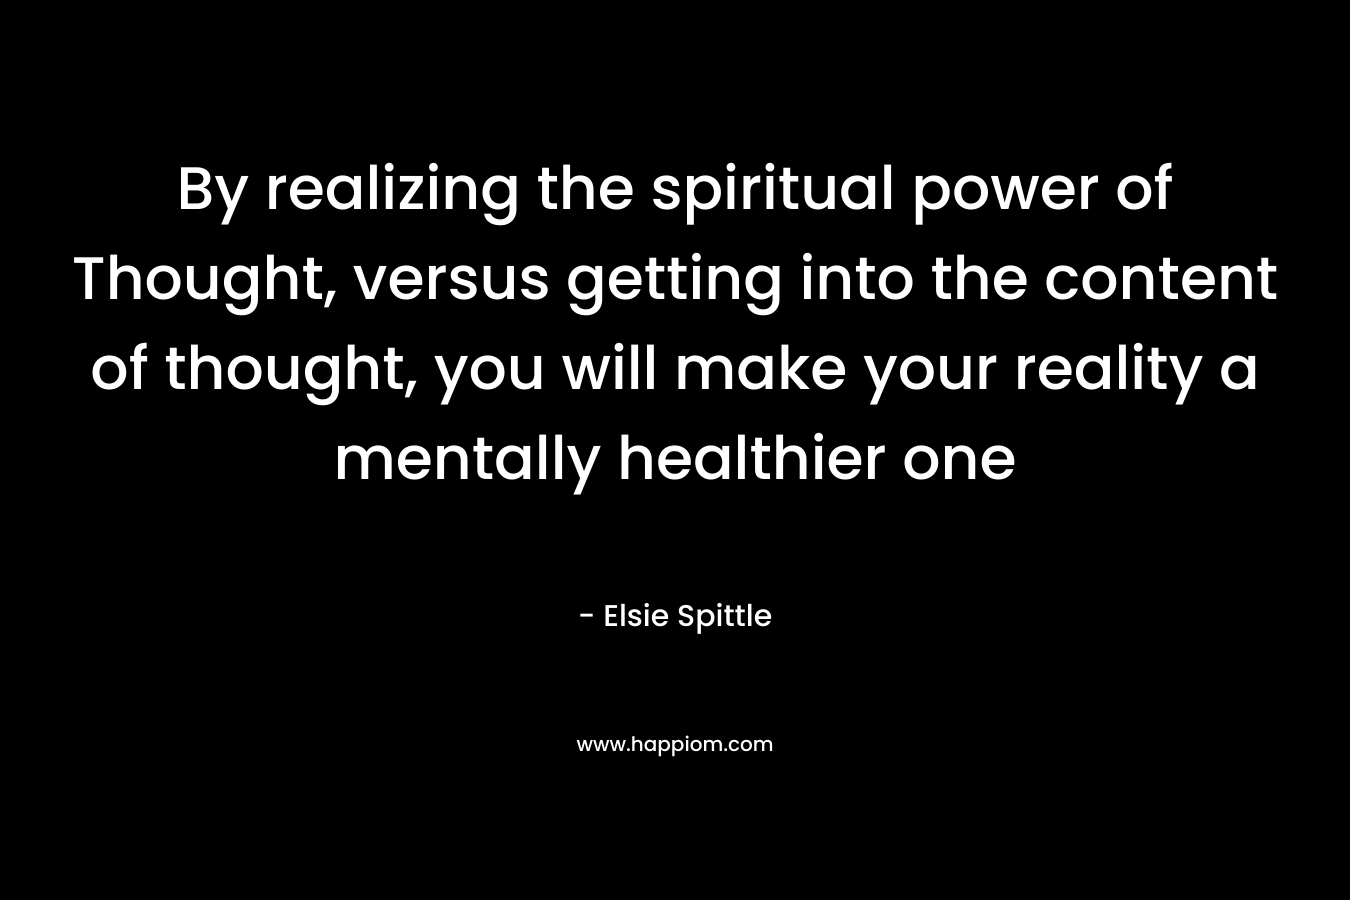 By realizing the spiritual power of Thought, versus getting into the content of thought, you will make your reality a mentally healthier one